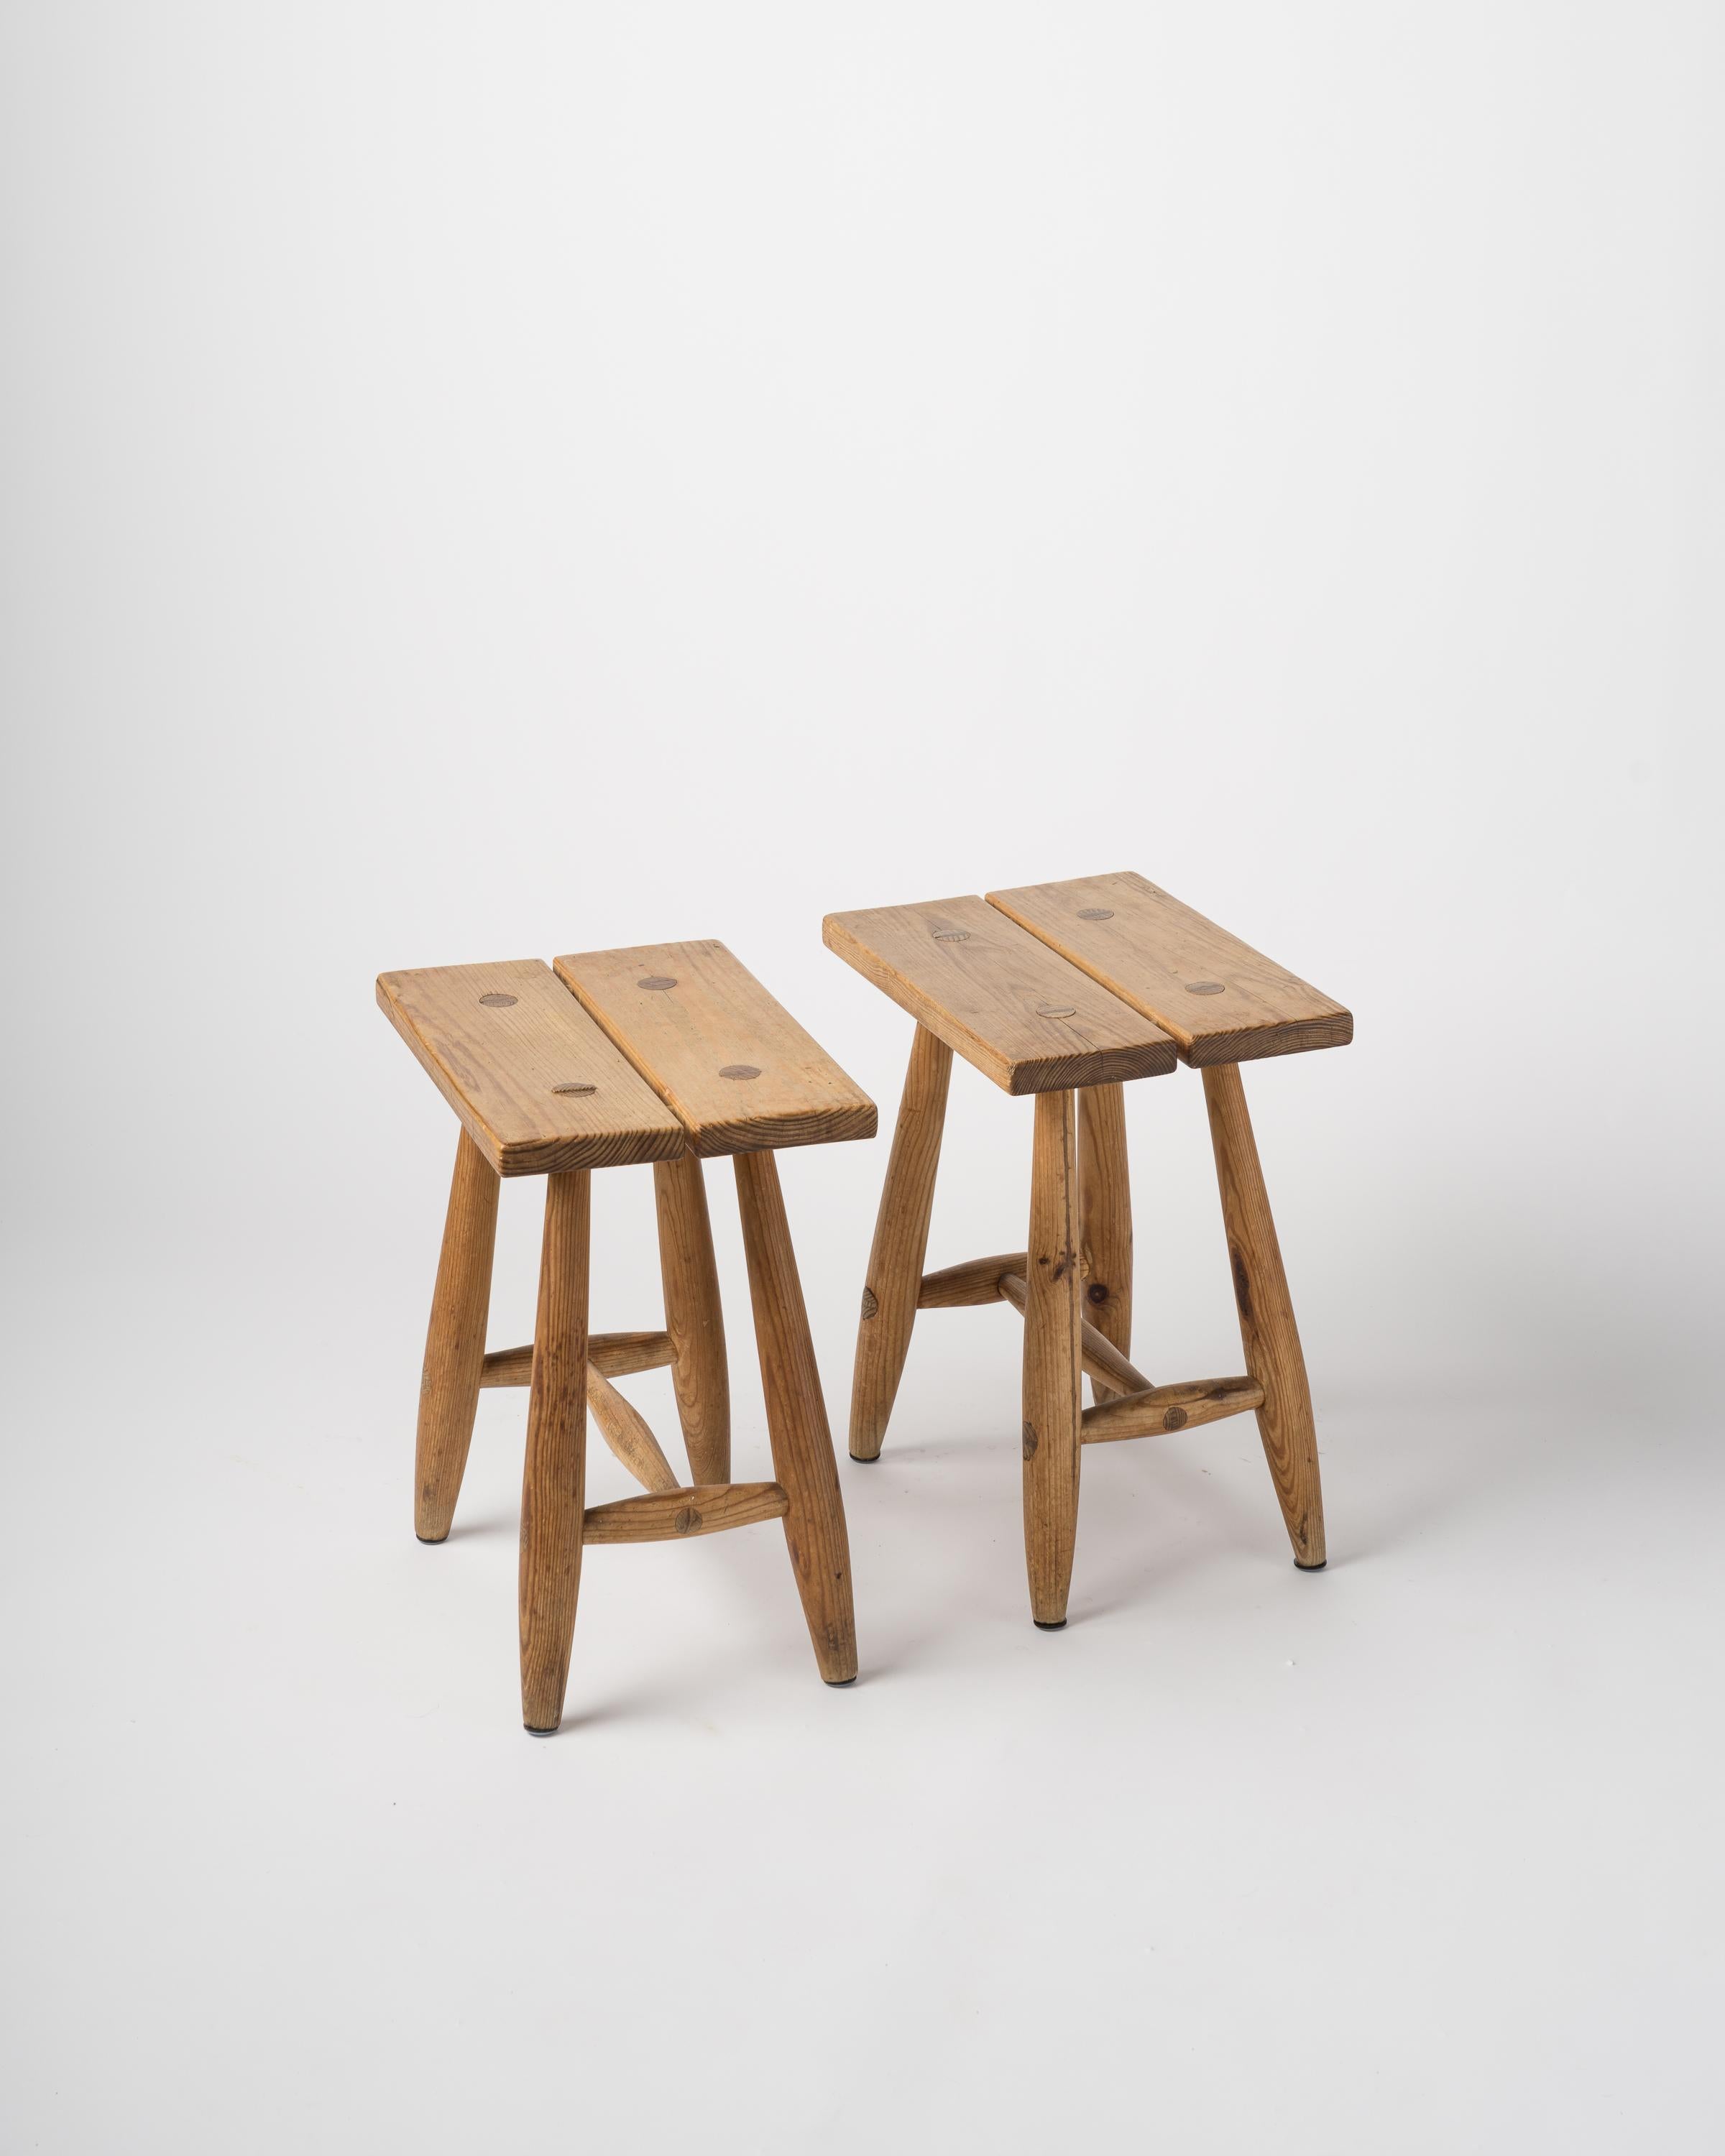 In the style of Pierre Gautier Delaye
Four legs.
Both stools are sturdy.
These stools will ship from France
Price does not include shipping nor possible customs related charges.
